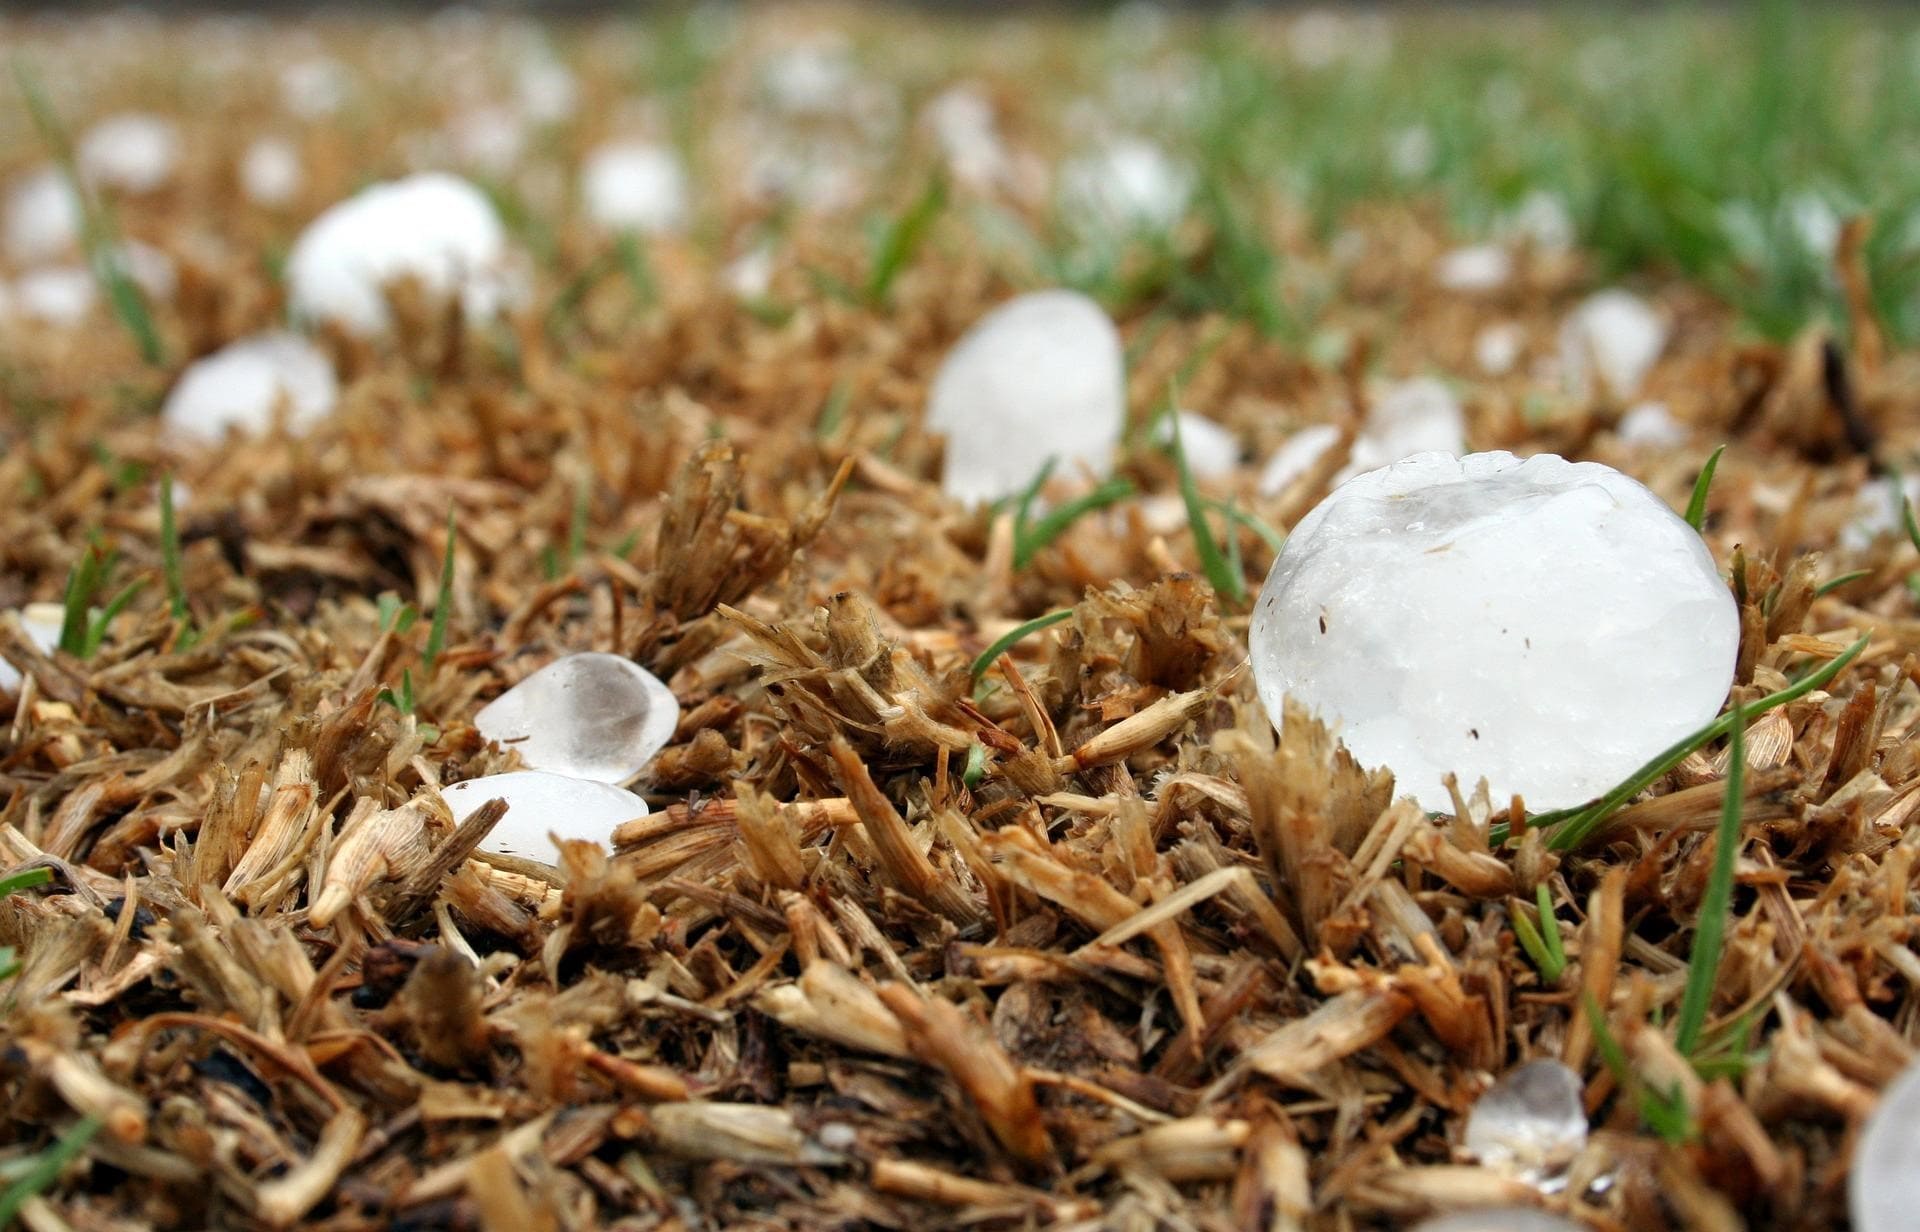 Hailstorm can damage your roof